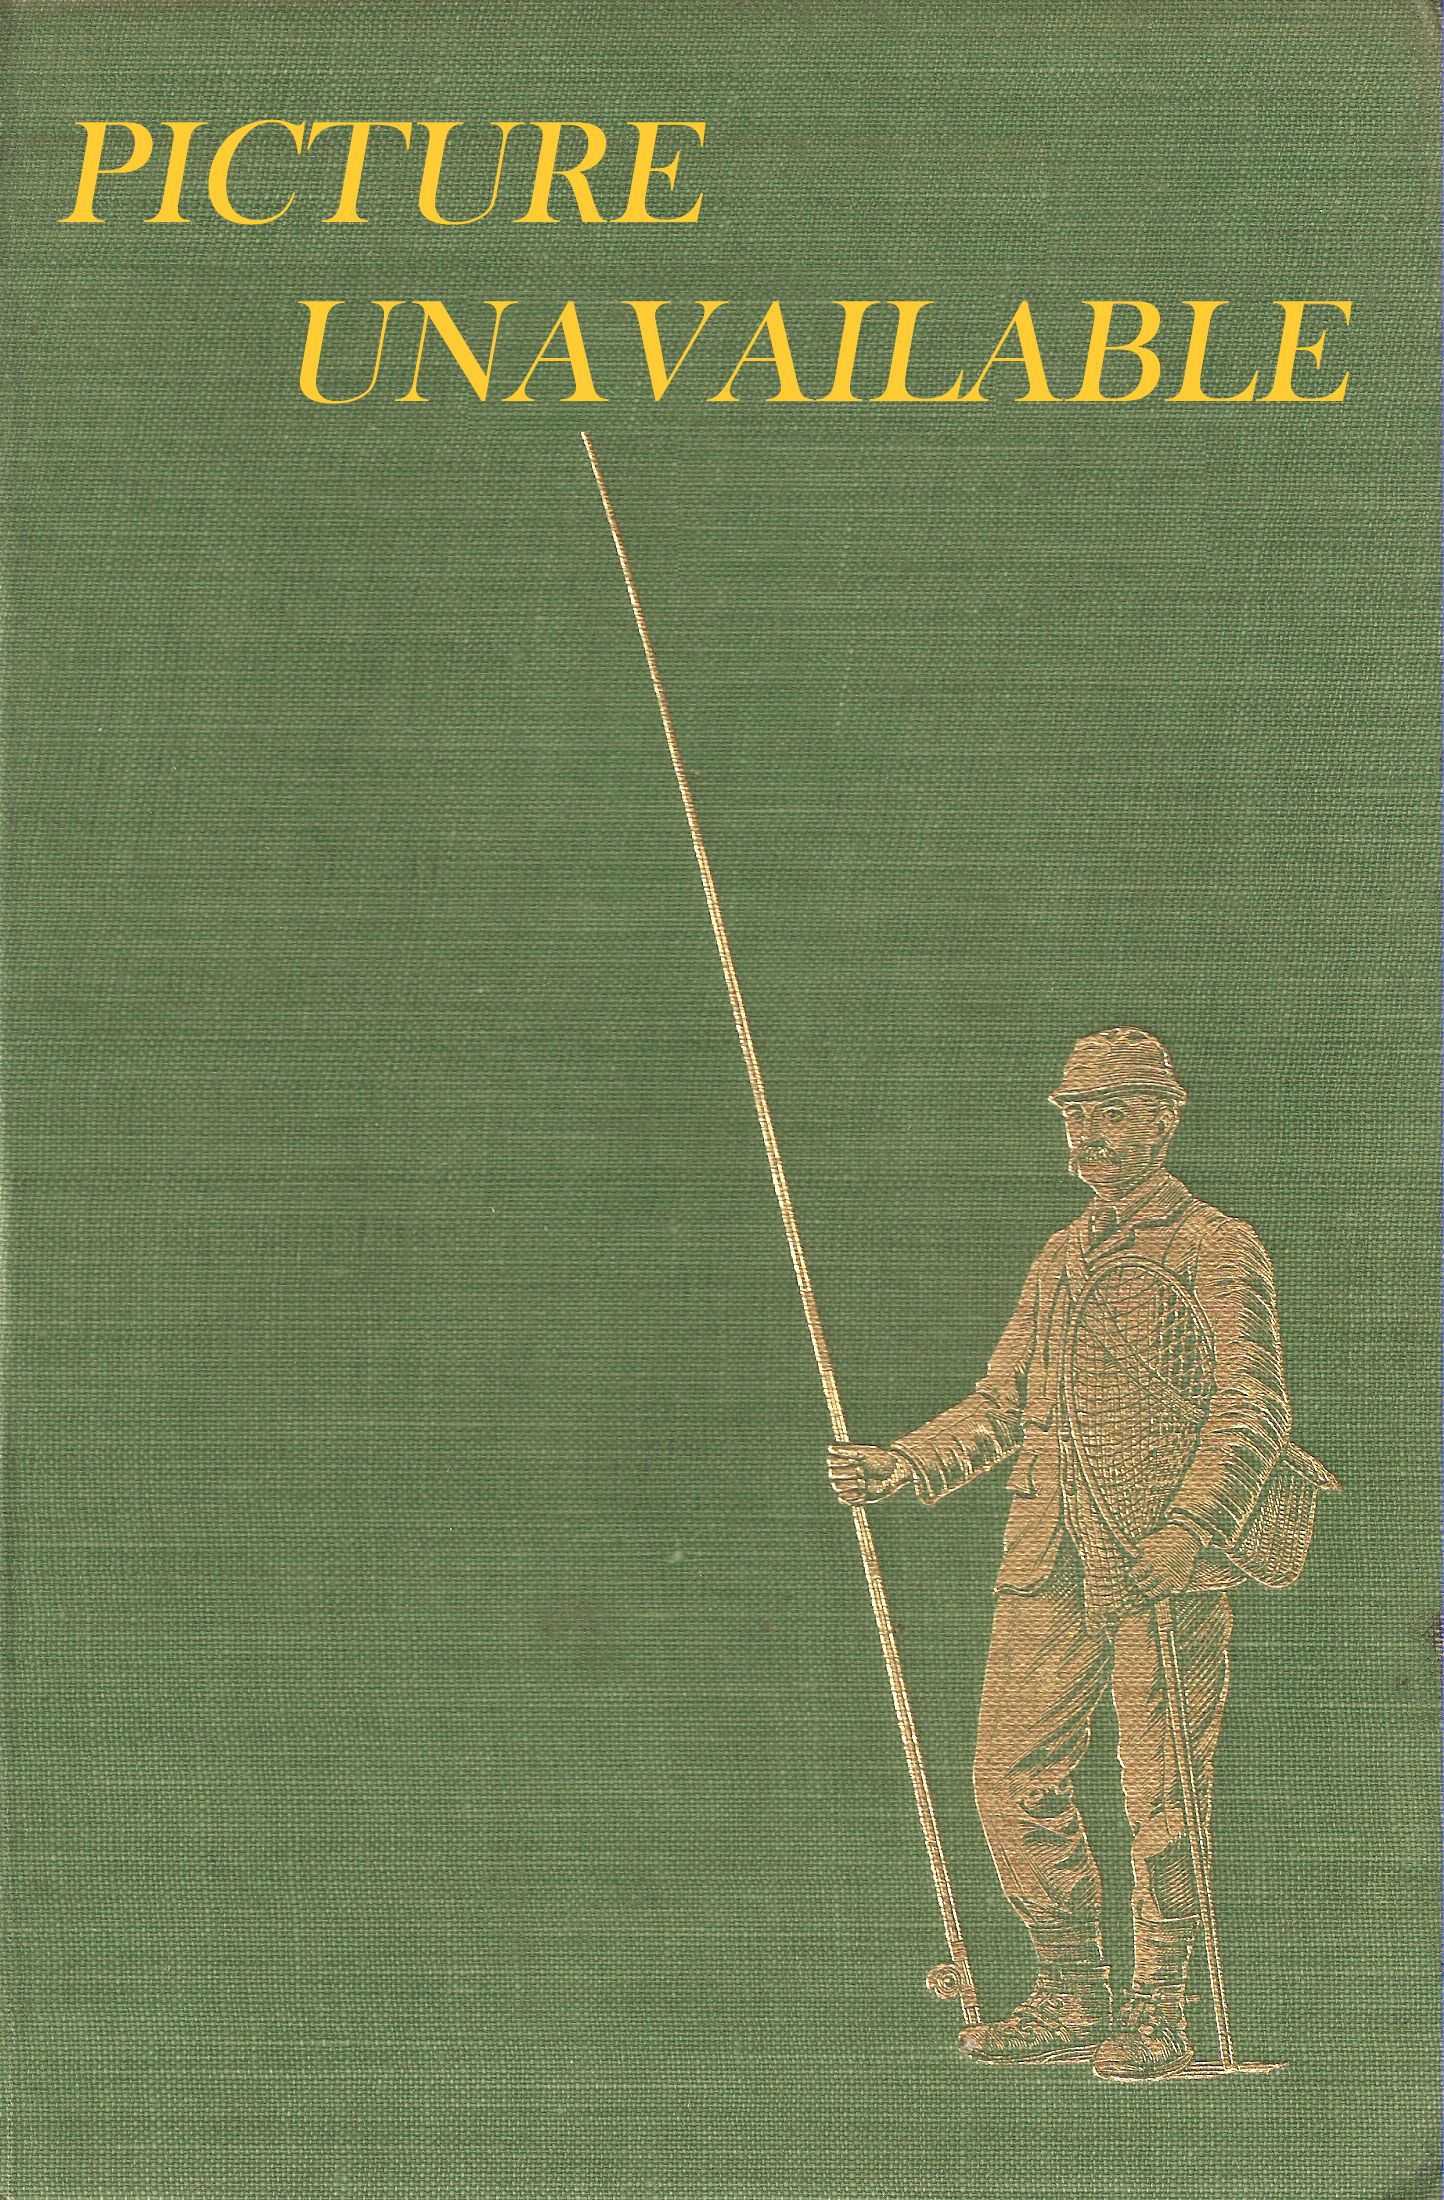 CREEL: A FISHING MAGAZINE. Volume 1, number 2. August 1963.